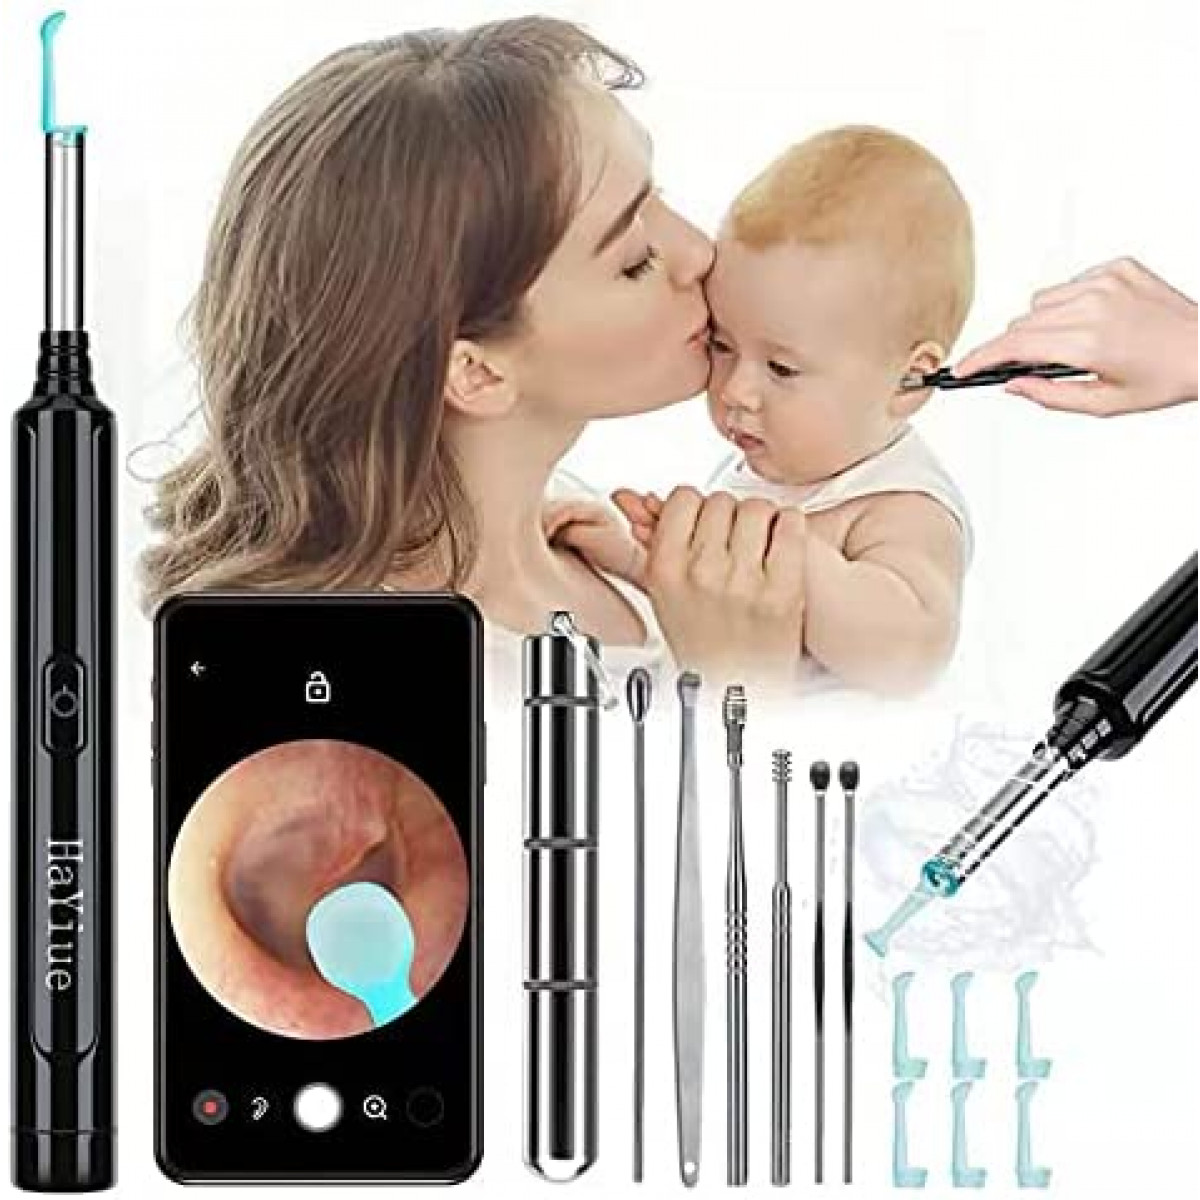 HaYiue Ear Wax Removal with Camera, Earwax Remover Tool, 1296P FHD